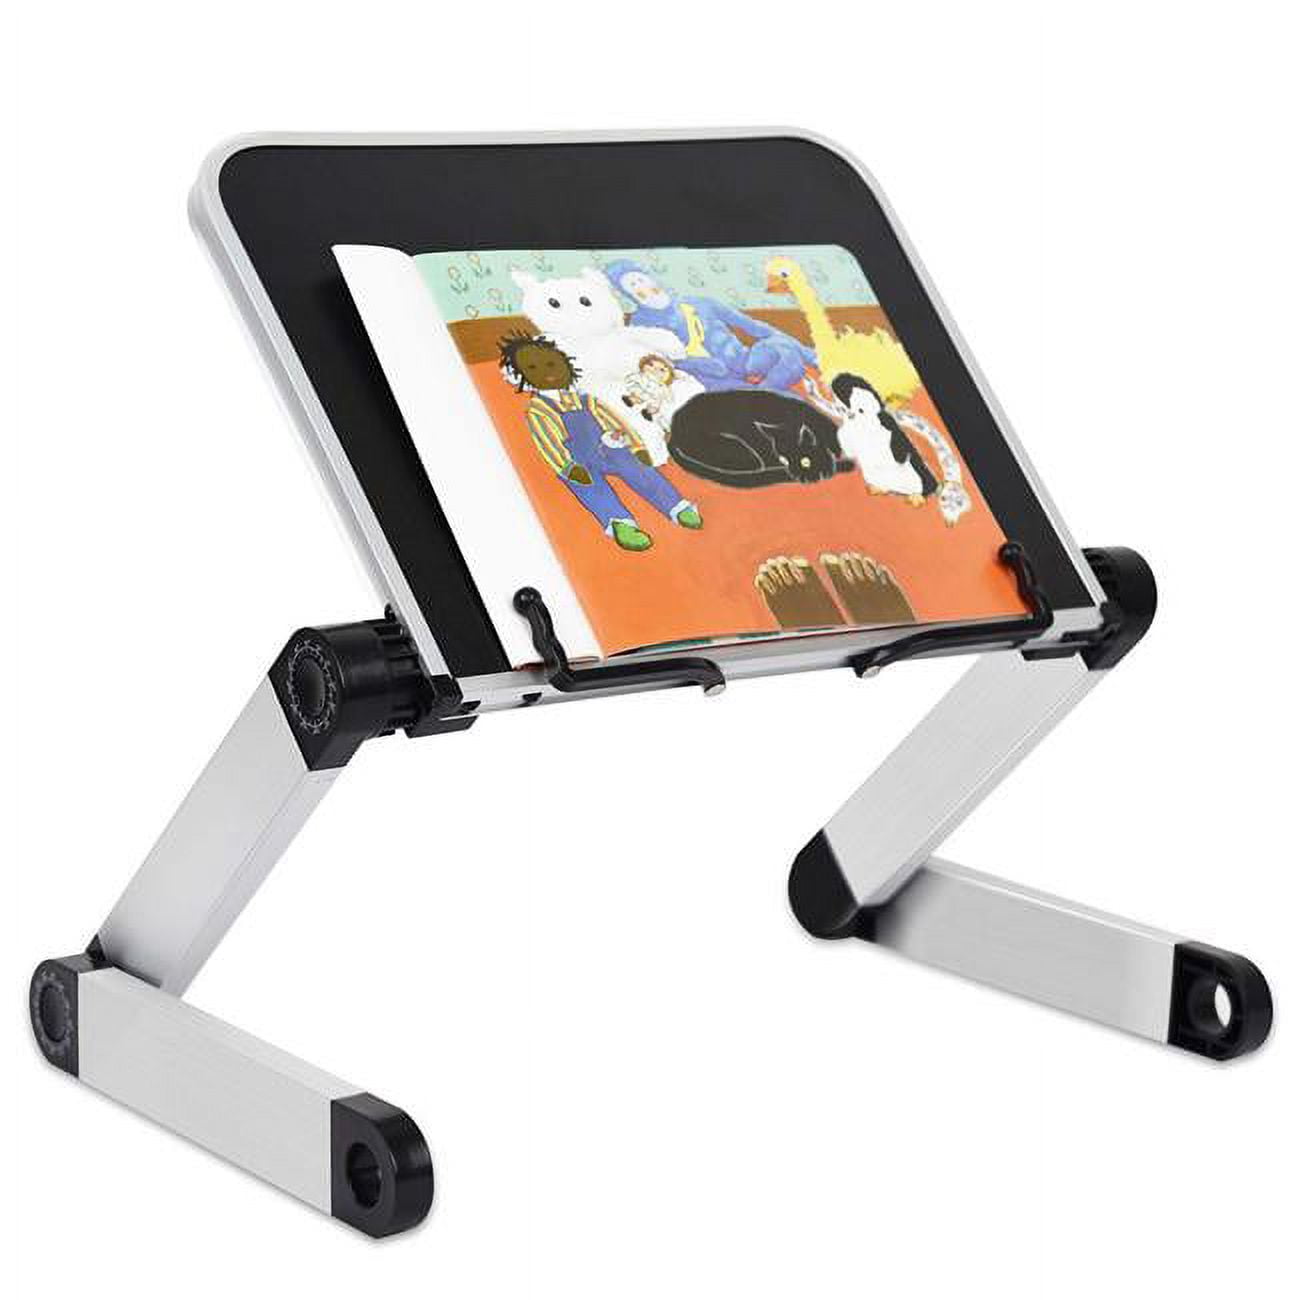 Myfurnideal Bamboo Book Stand Foldable Reading Book Holder Cookbook Book  Holder with 5 Adjustable Height for Textbook, Receipe, Music Books, Tablet,  Ipad 